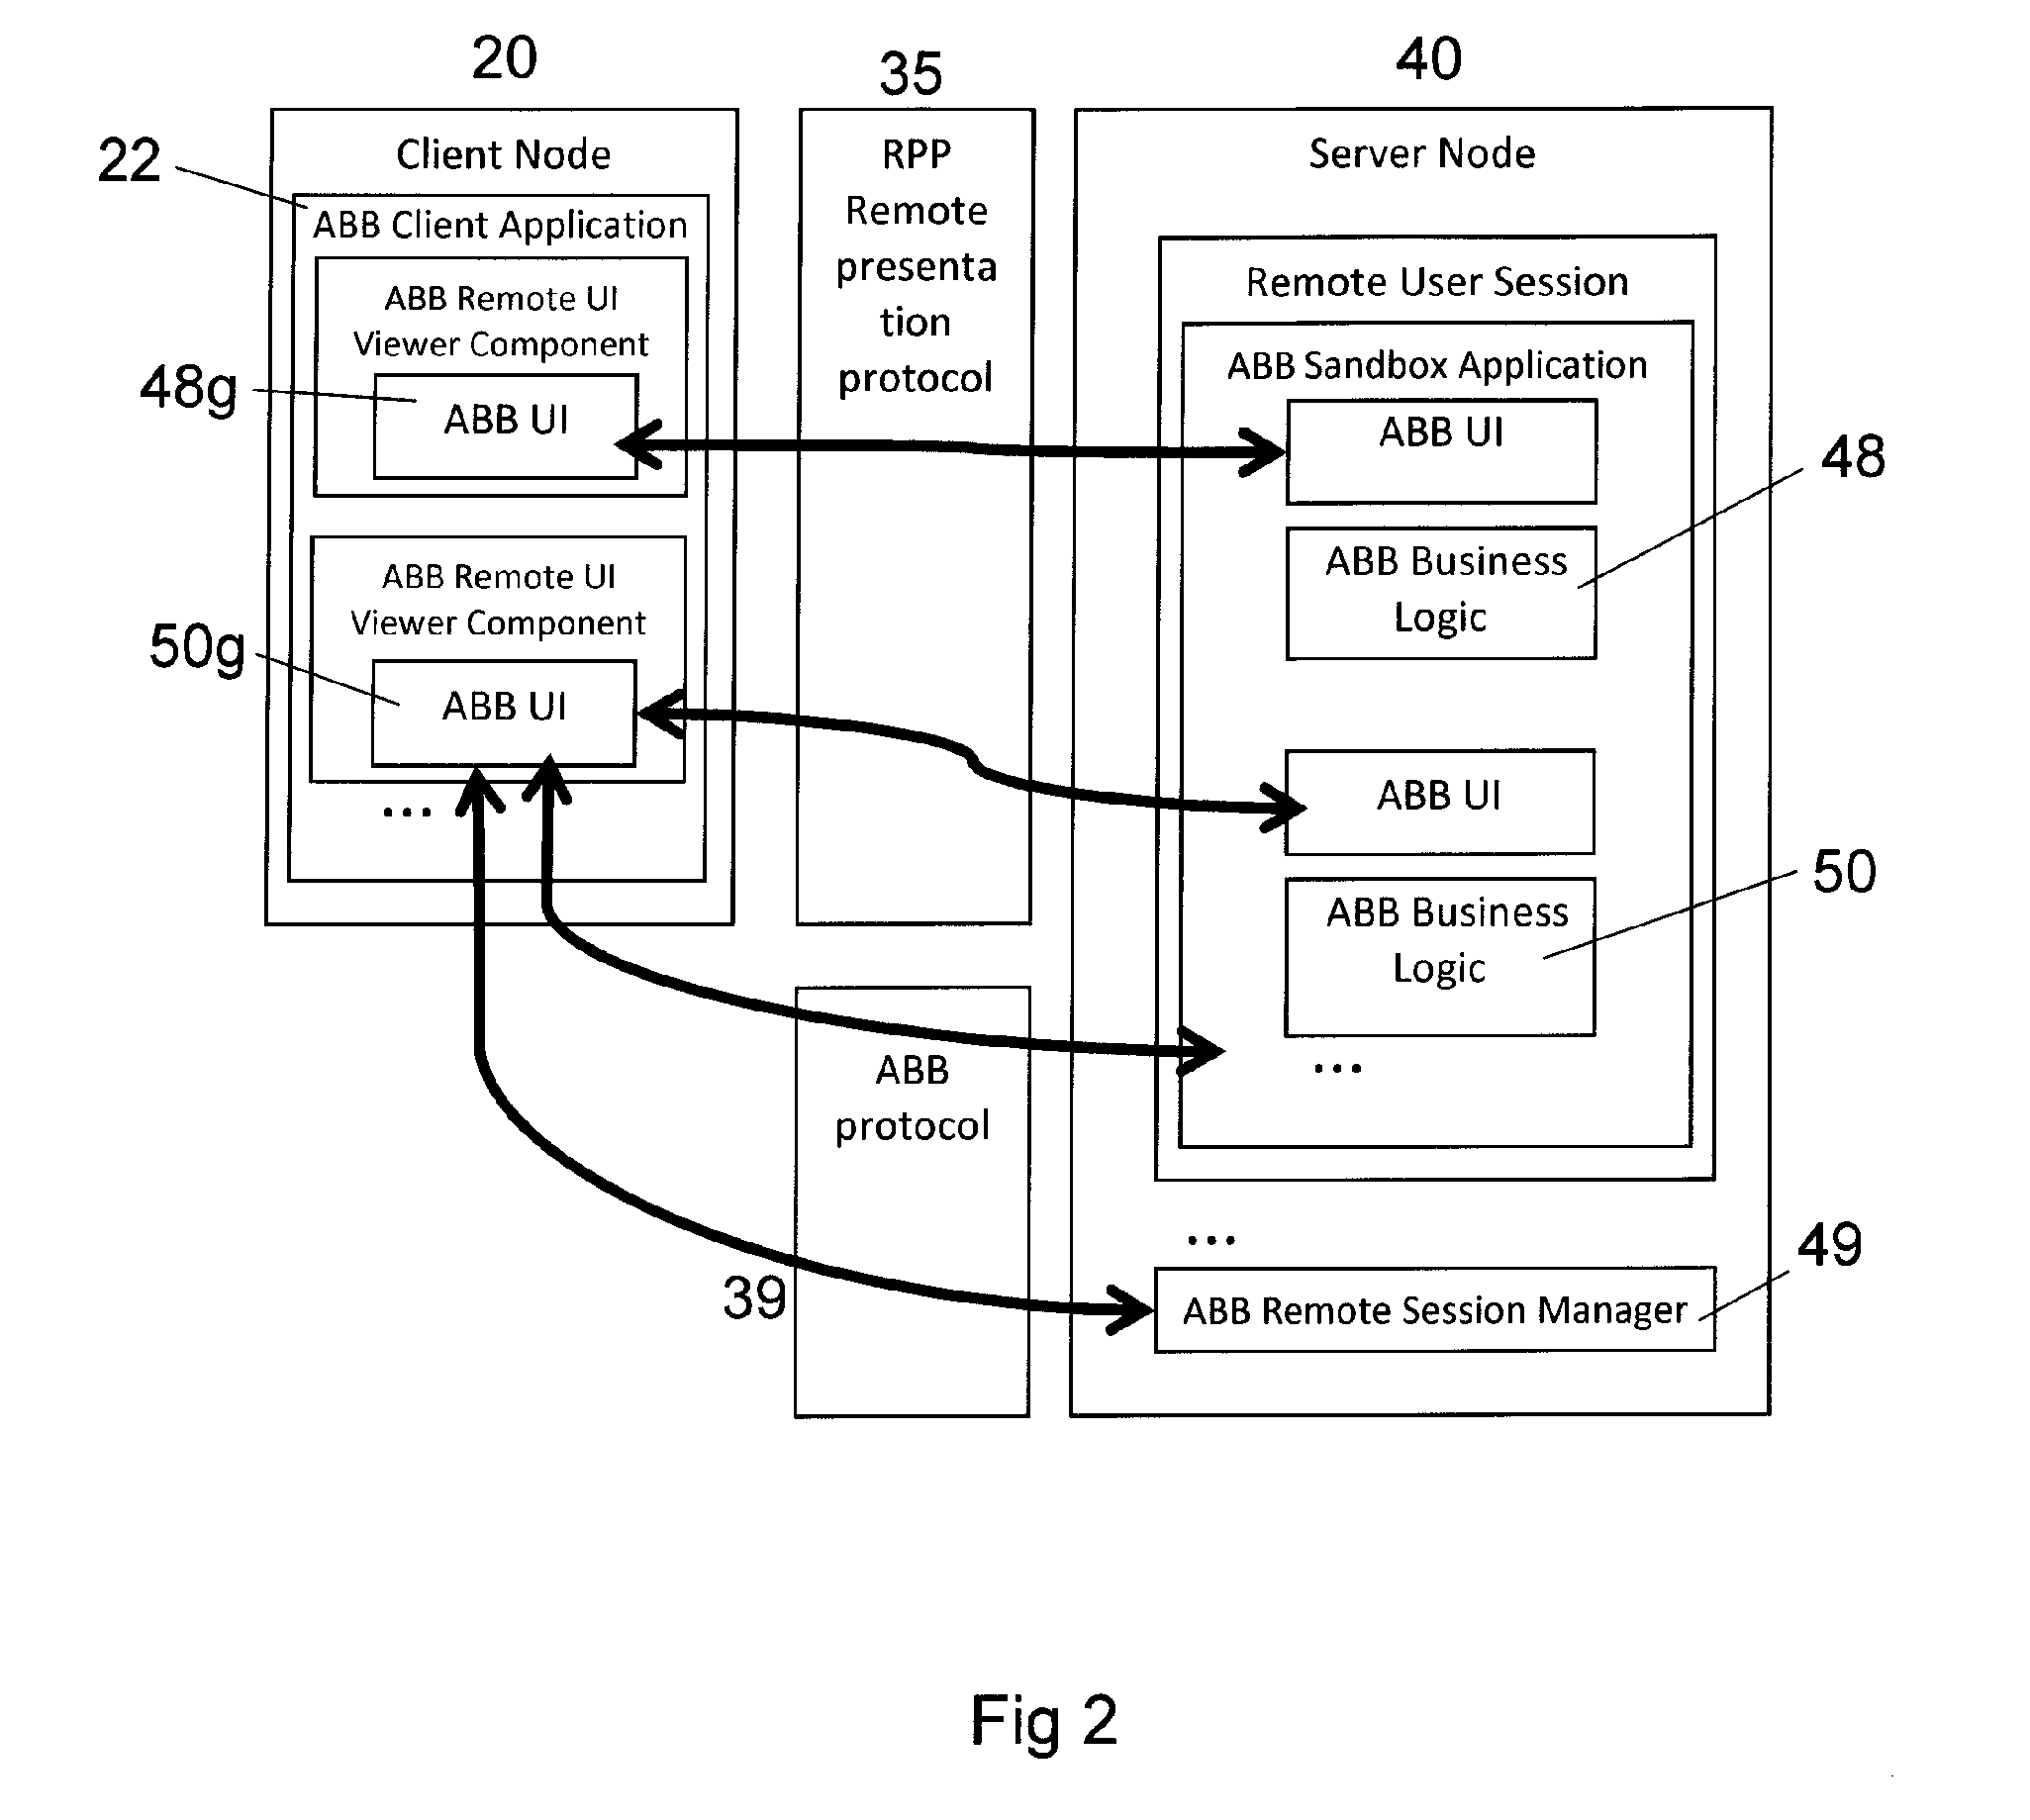 Method For Control In A Process Control System Implemented In Part By One Or More Computer Implemented Run-Time Processes